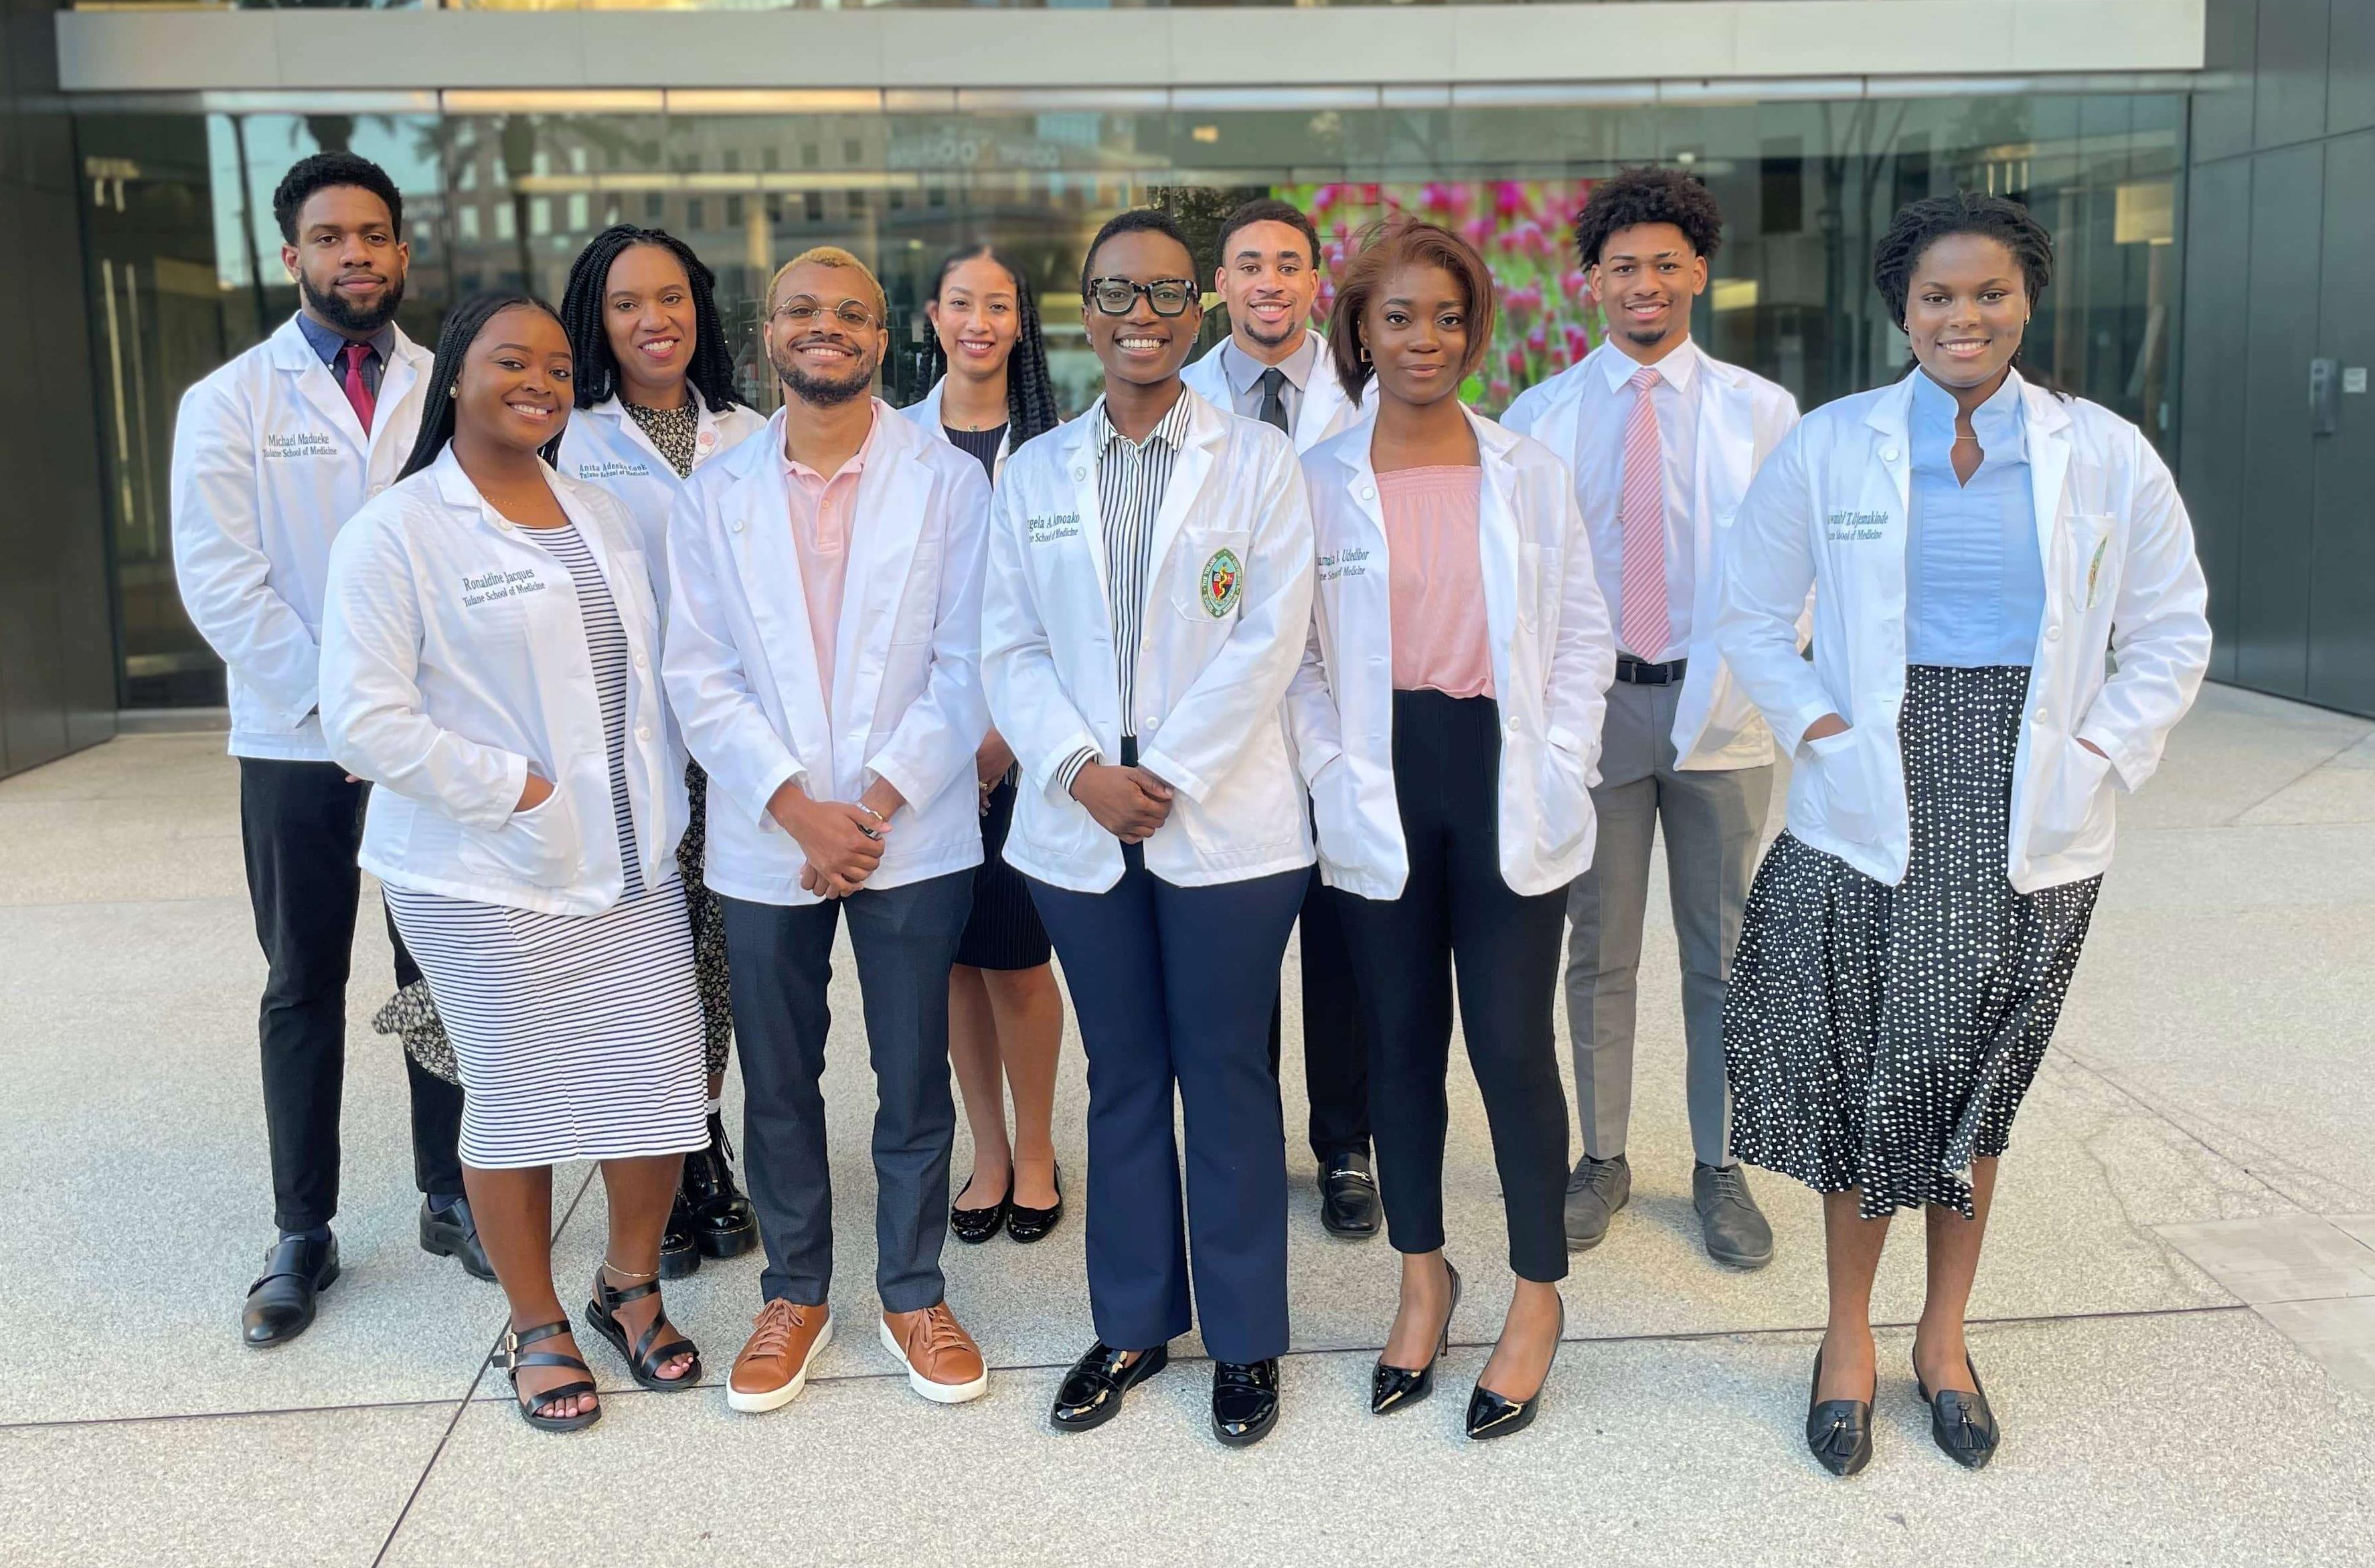 SNMA eboard leadership in their white coats